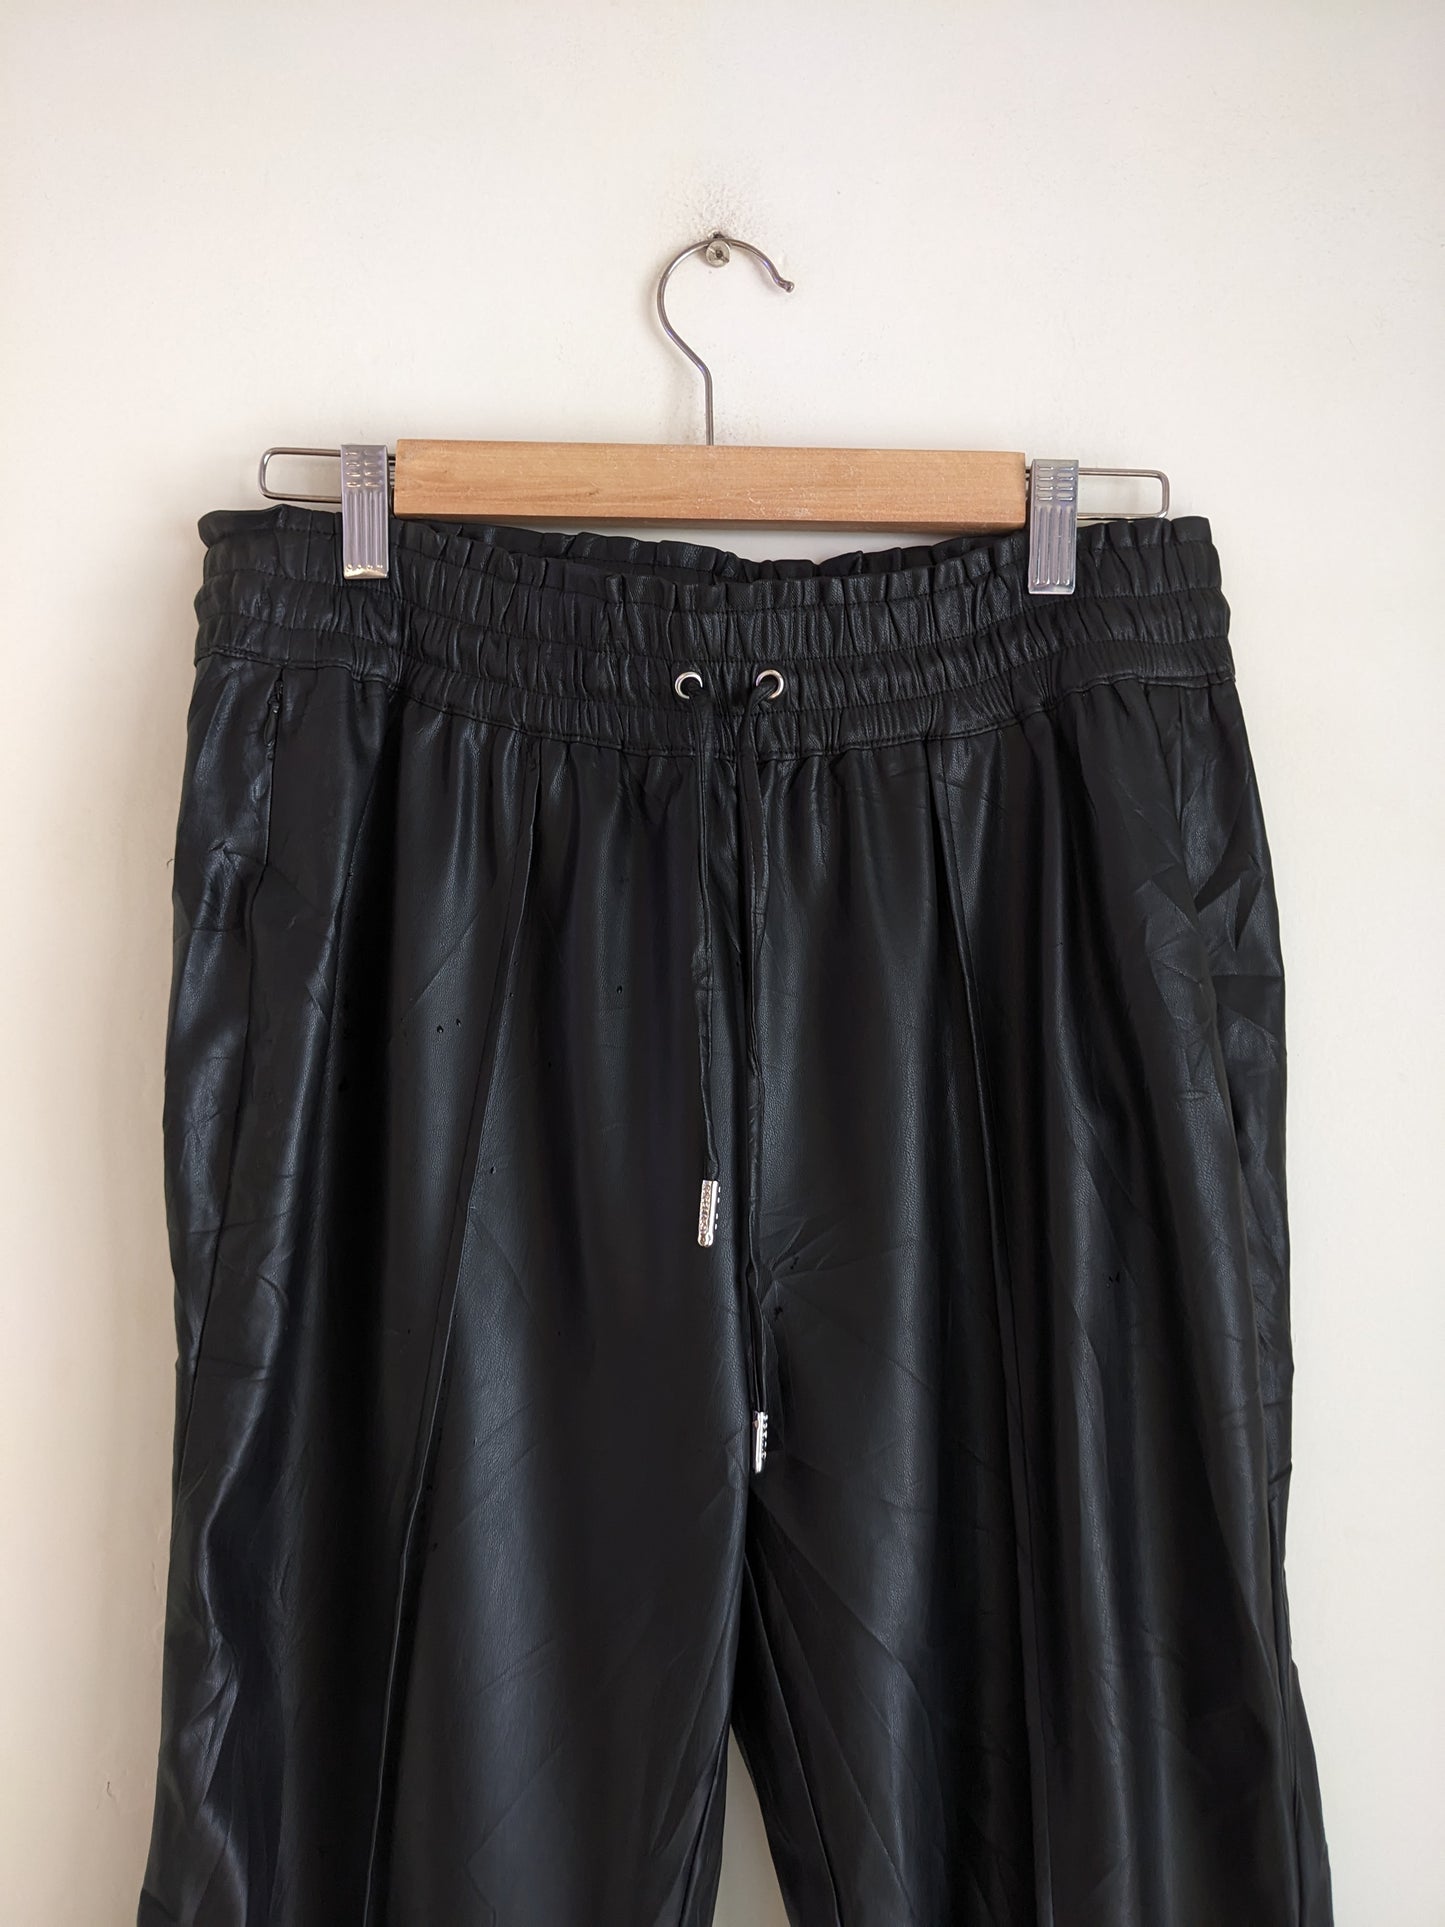 Guess Black Leather Pant